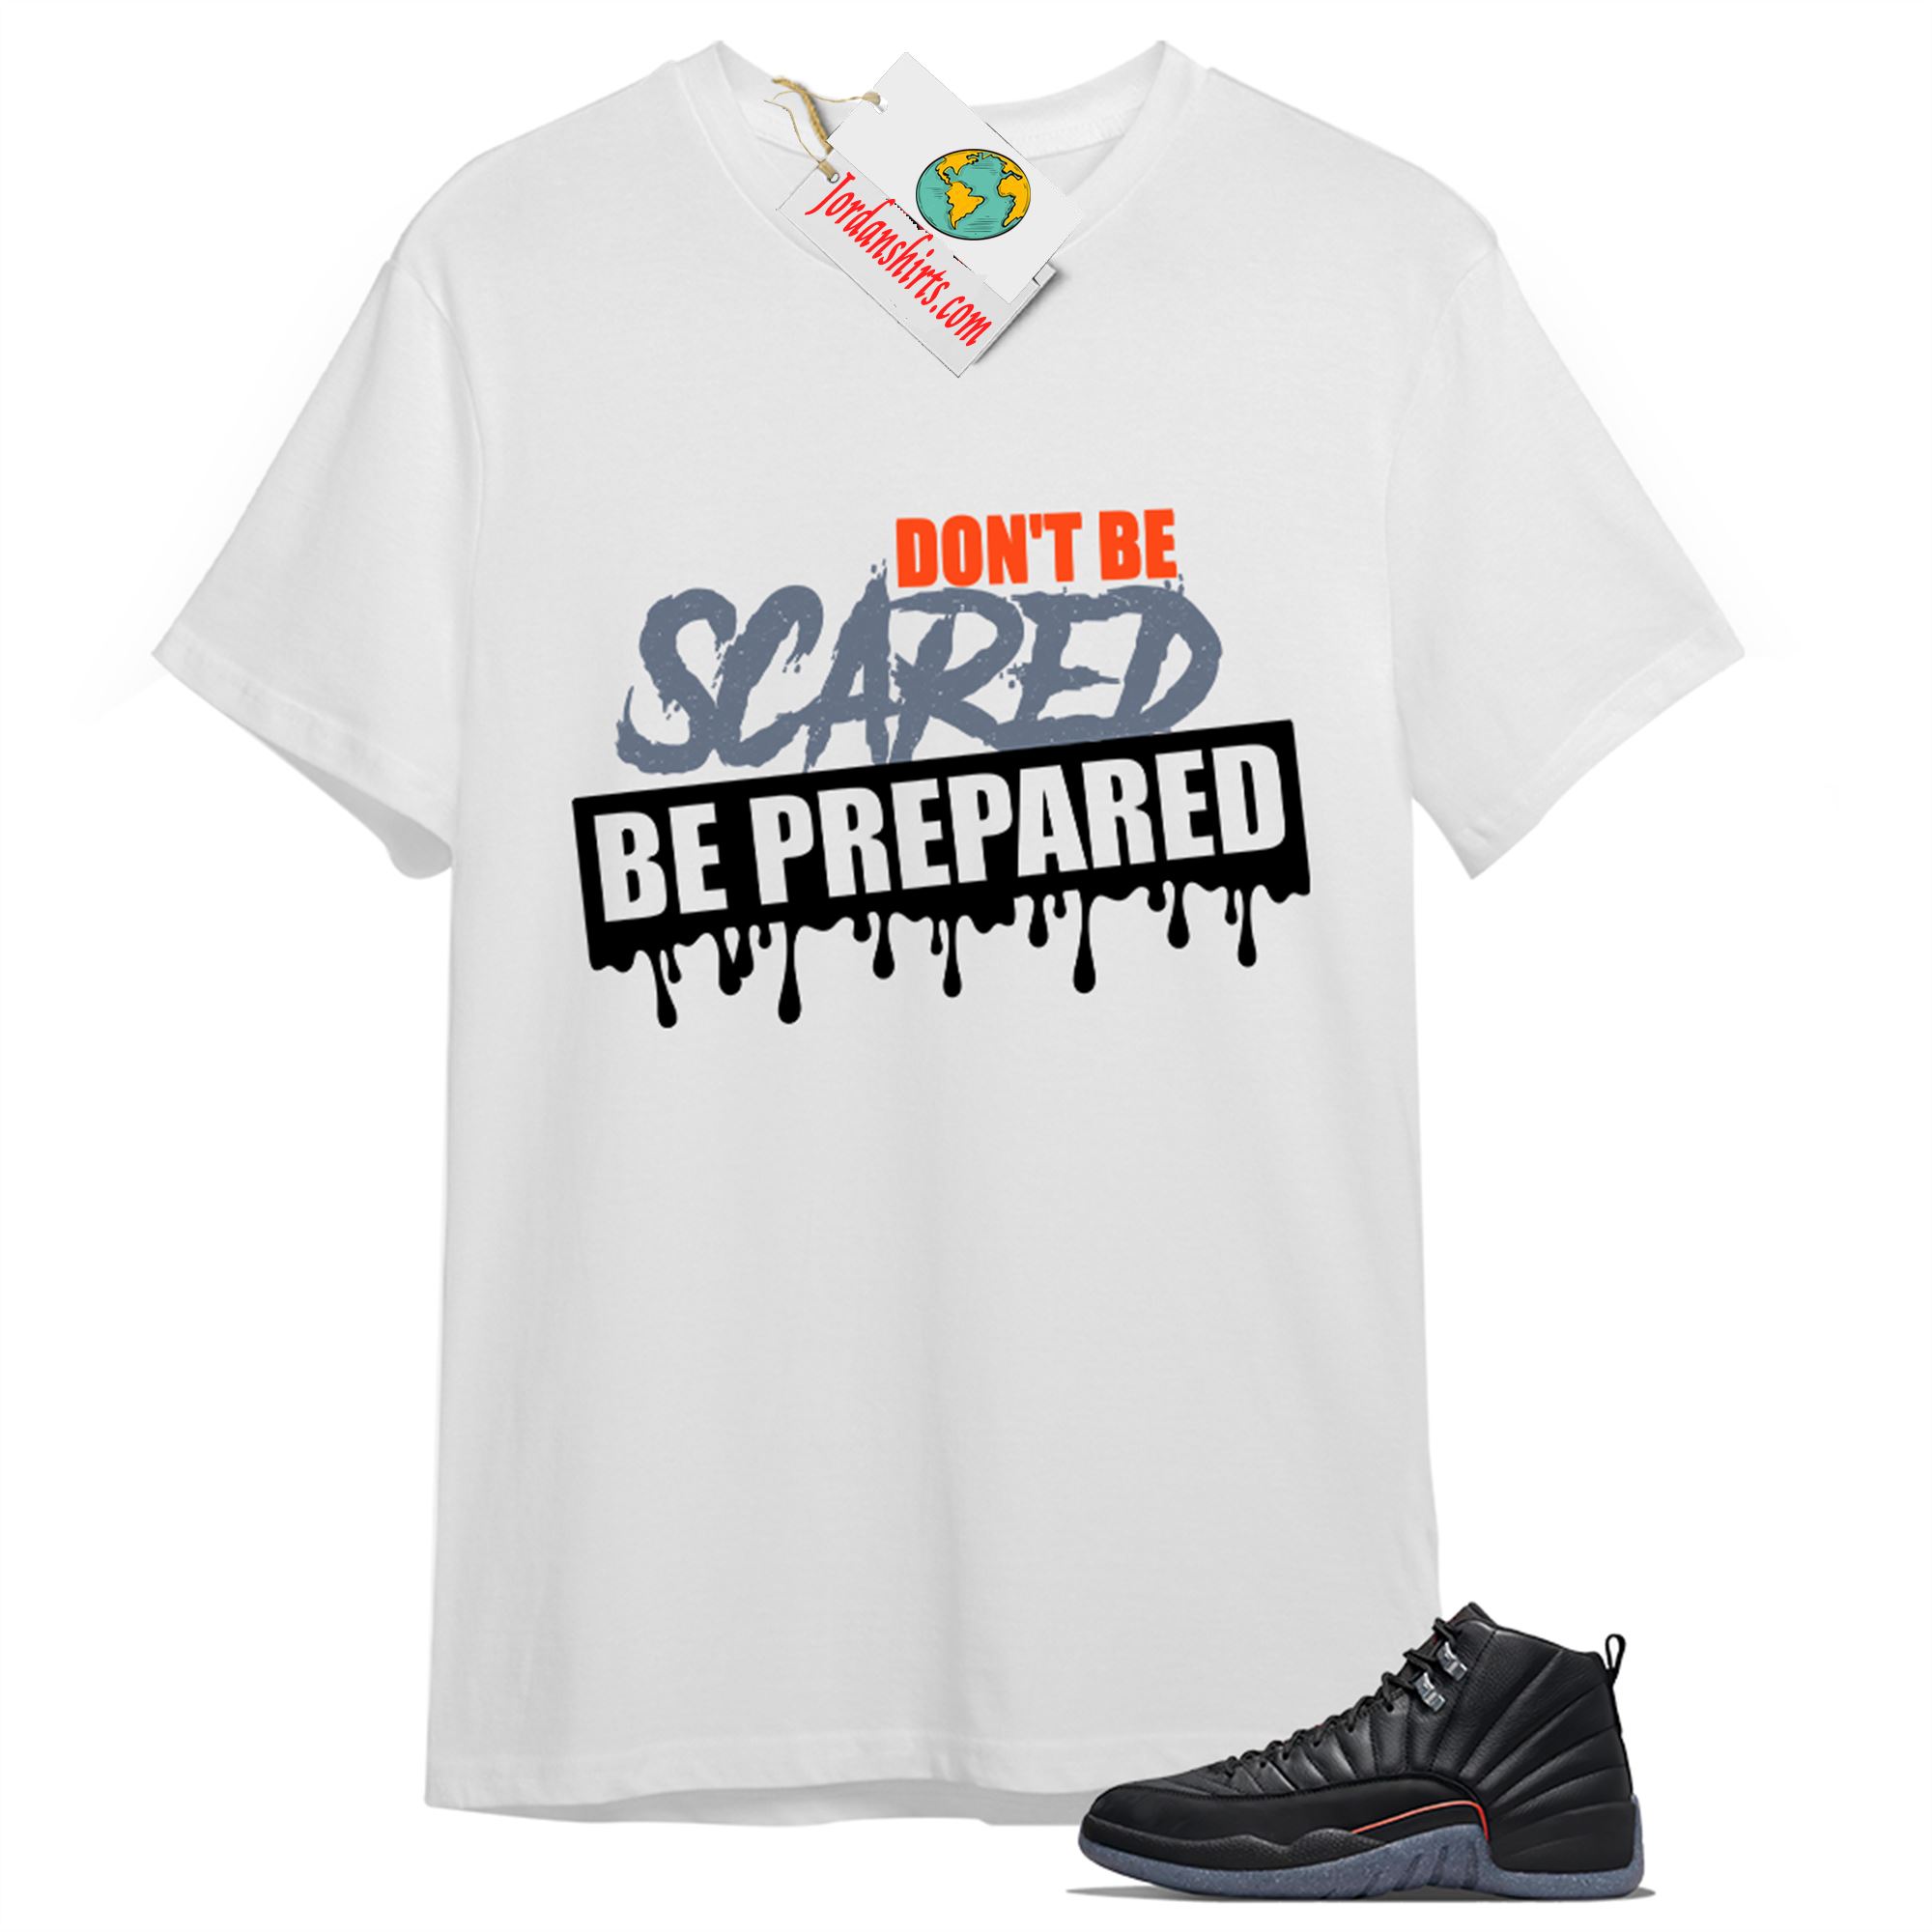 Jordan 12 Shirt, Dont Be Scared Be Prepared White T-shirt Air Jordan 12 Utility Grind 12s Size Up To 5xl